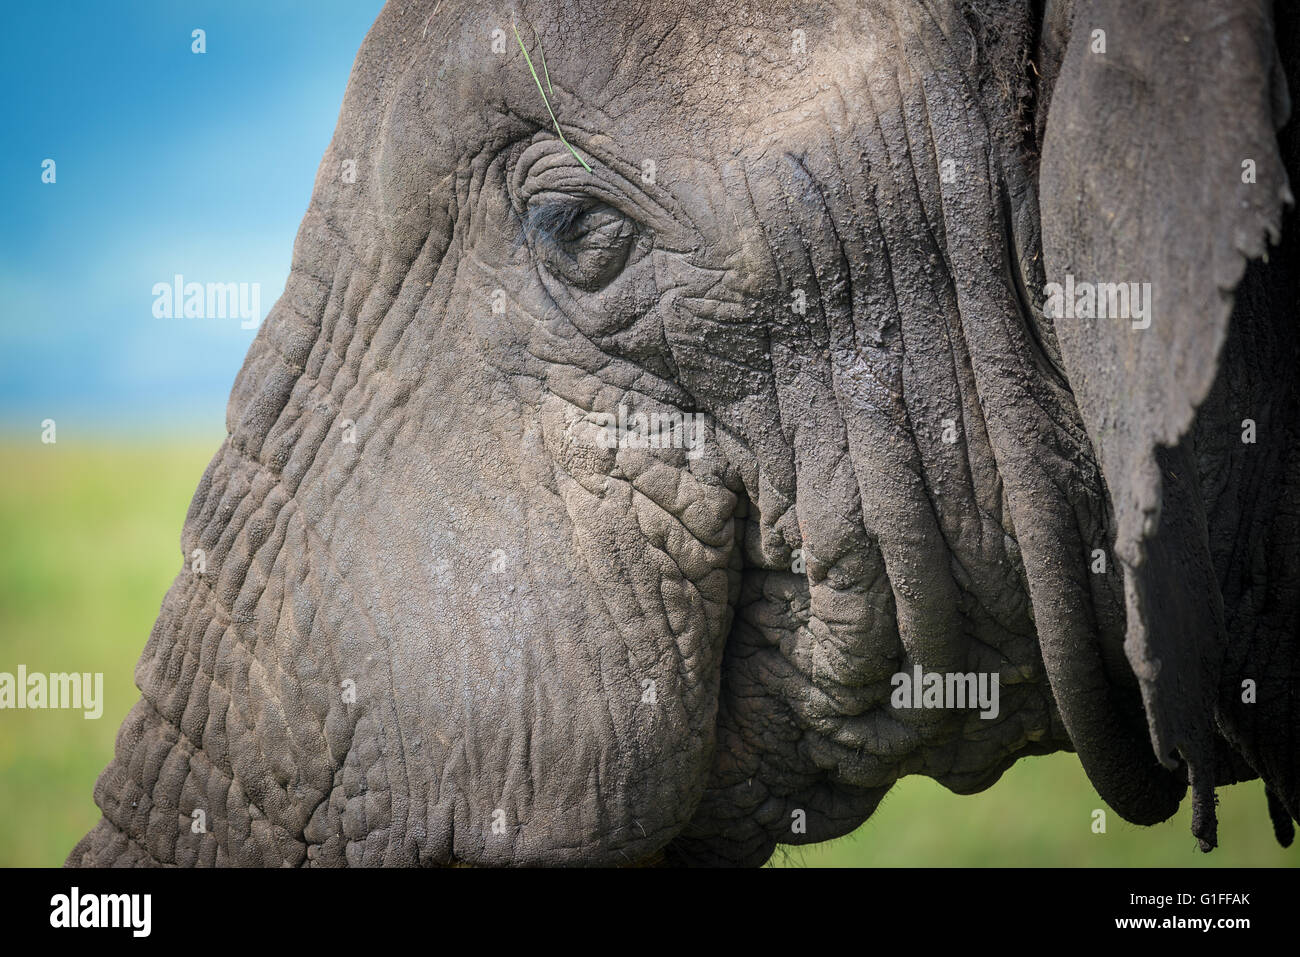 A close up image of a large adult bull elephant grazing on the fertile grasses in the Ngorongoro Crater in Tanzania, East Africa Stock Photo